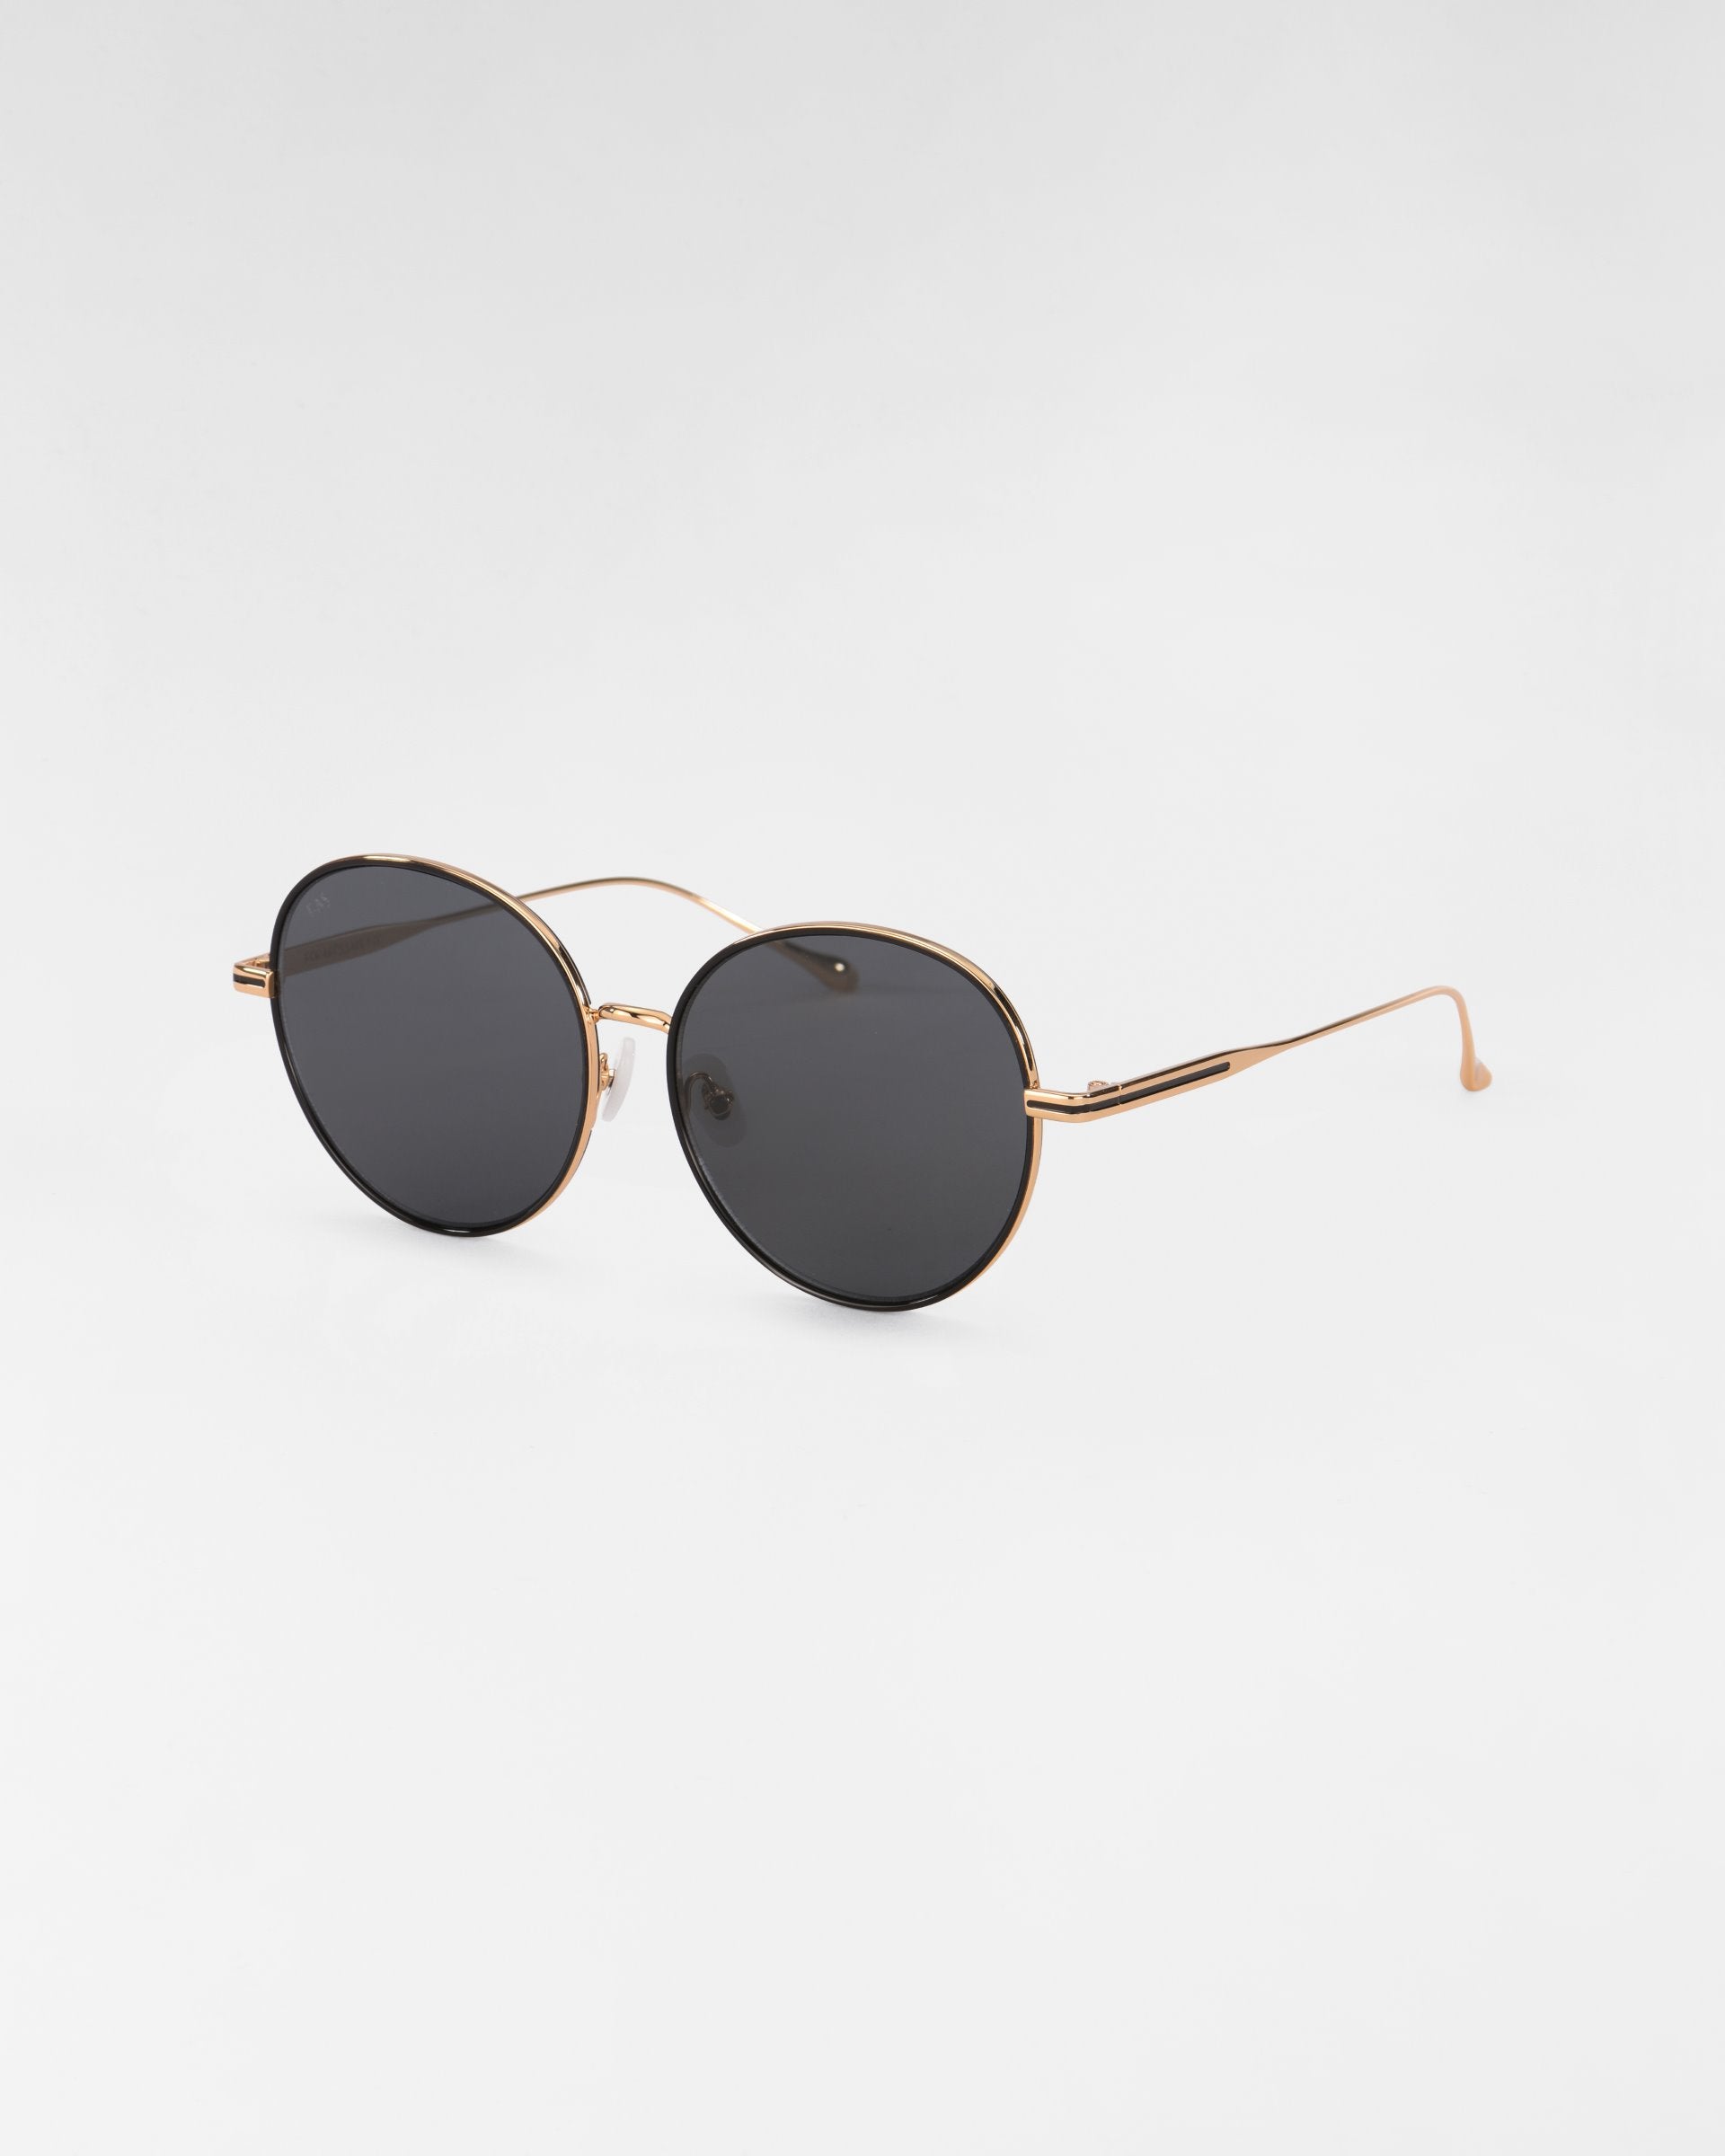 A pair of round Lemon sunglasses from For Art&#39;s Sake® with thin, 18-karat gold-plated frames and dark lenses set against a white background. The temples are slender and slightly curved at the ends, adding a touch of elegance.